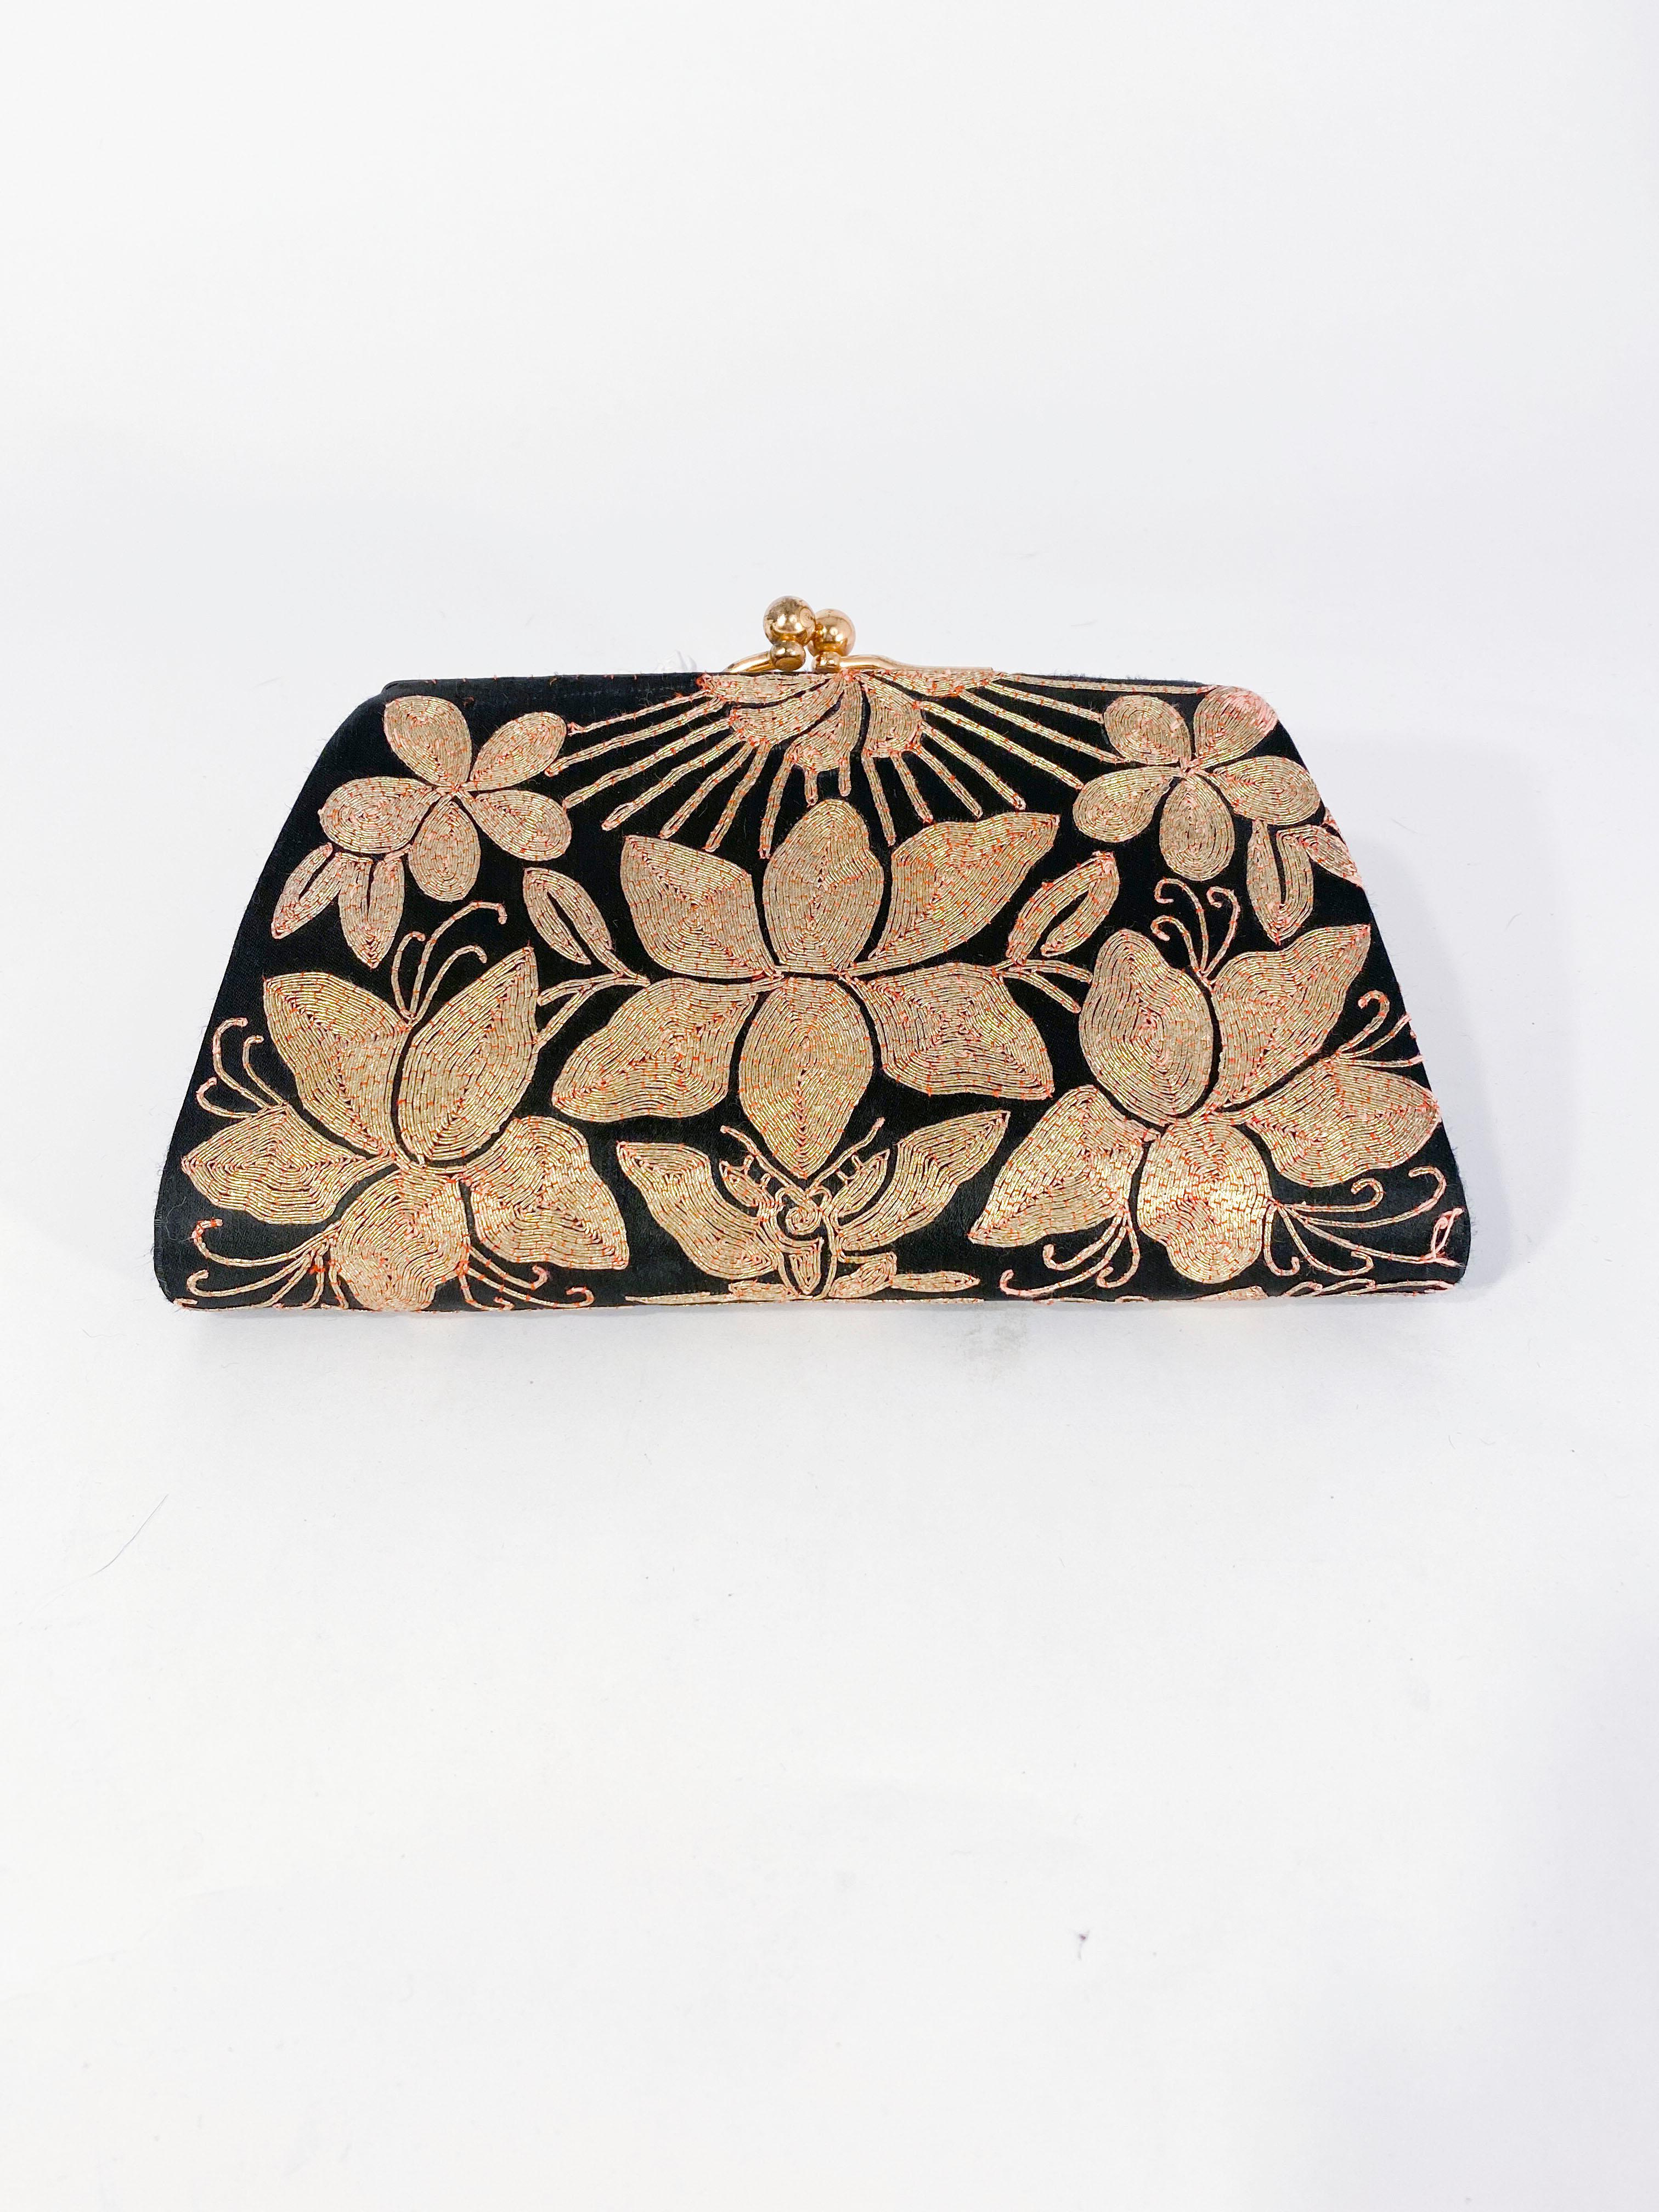 1940s black Satin evening clutch with decorative couched embroidery in metallic gold configured in flowers, butterfly, and sun-ray motifs. This type of Shusu embroidery is a traditional Japanese technique seen on Kimonos and other traditional